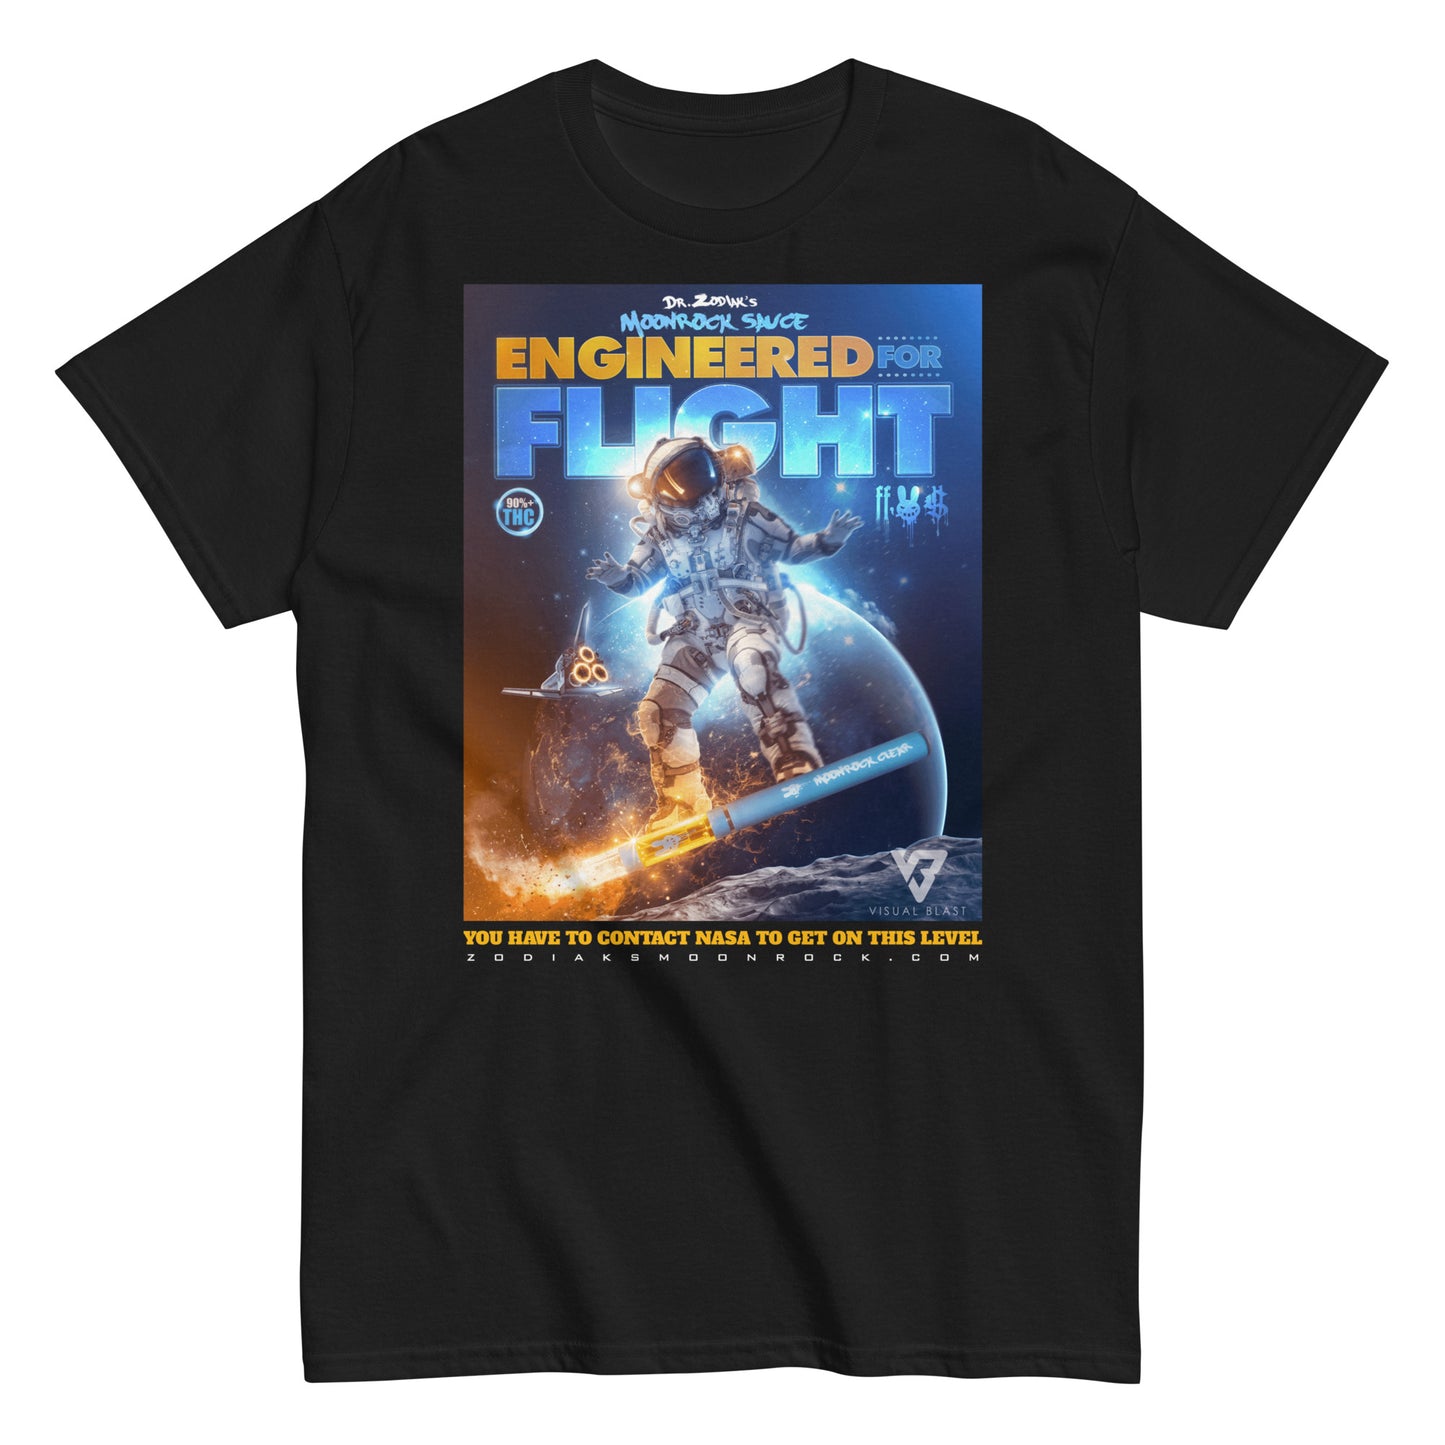 Engineered For Flight by Dr. Zodiak's Moonrock